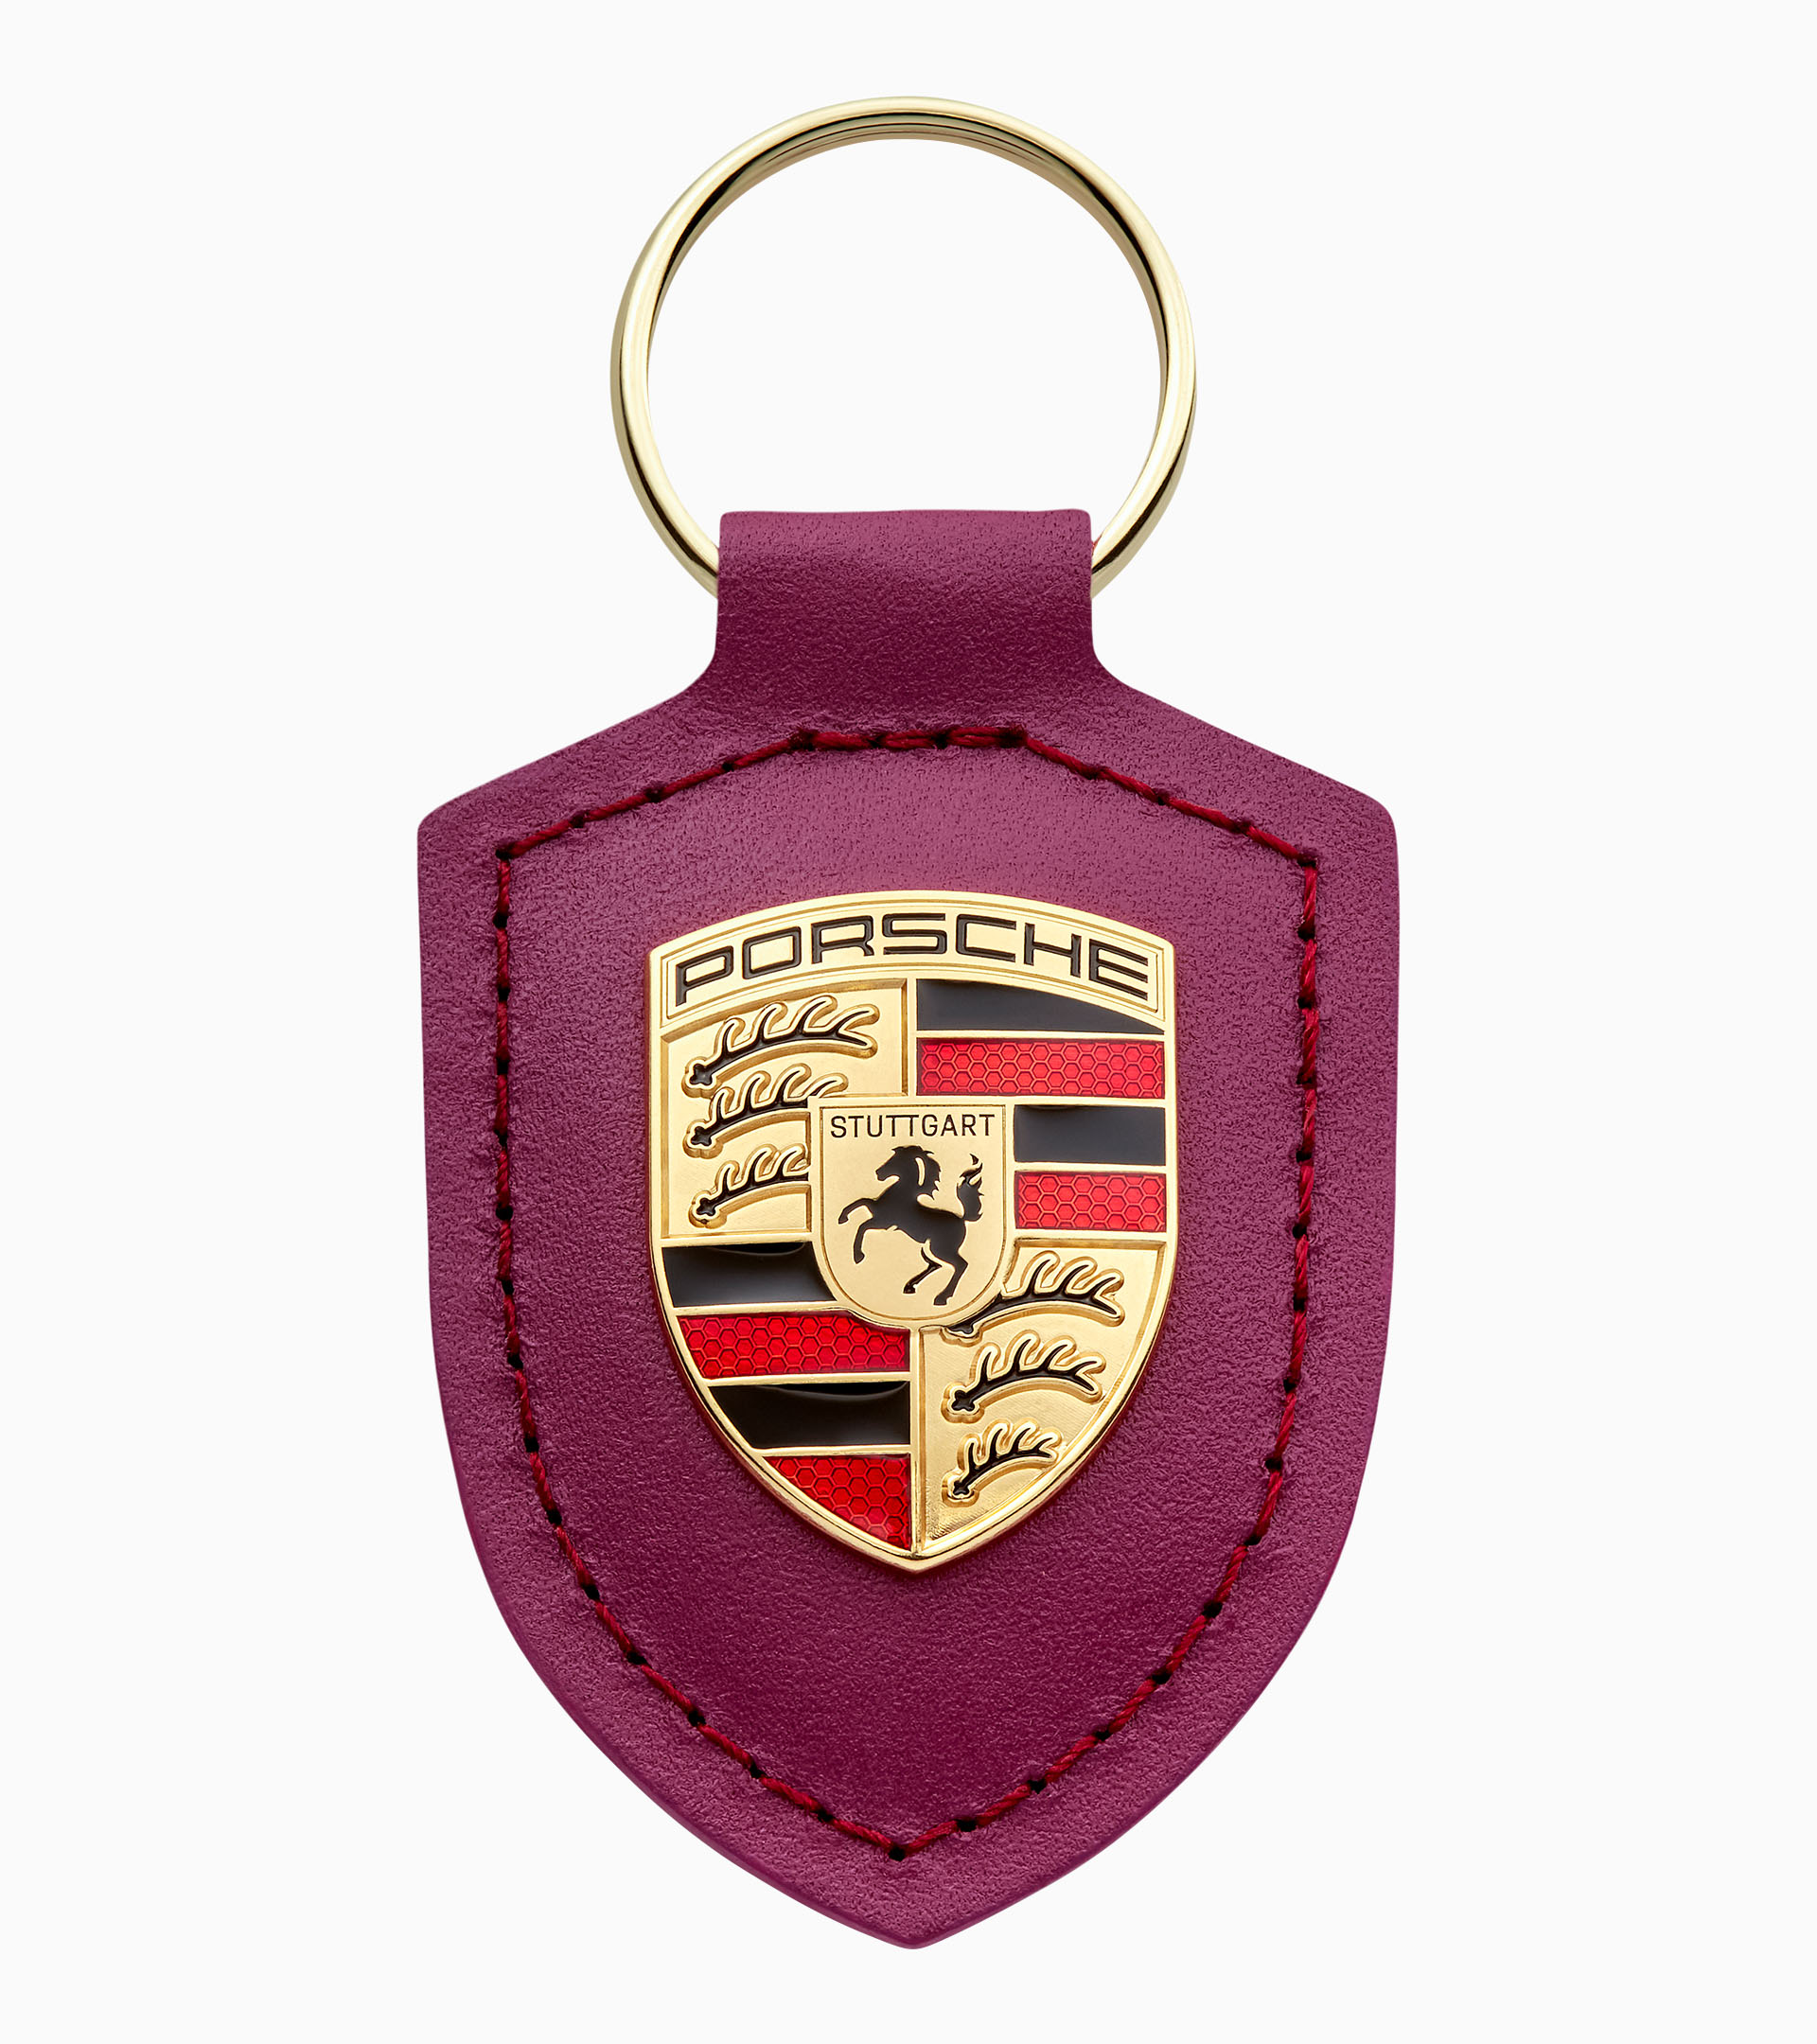 Porsche Crest Keyring Driven by Dreams Limited Edition star ruby